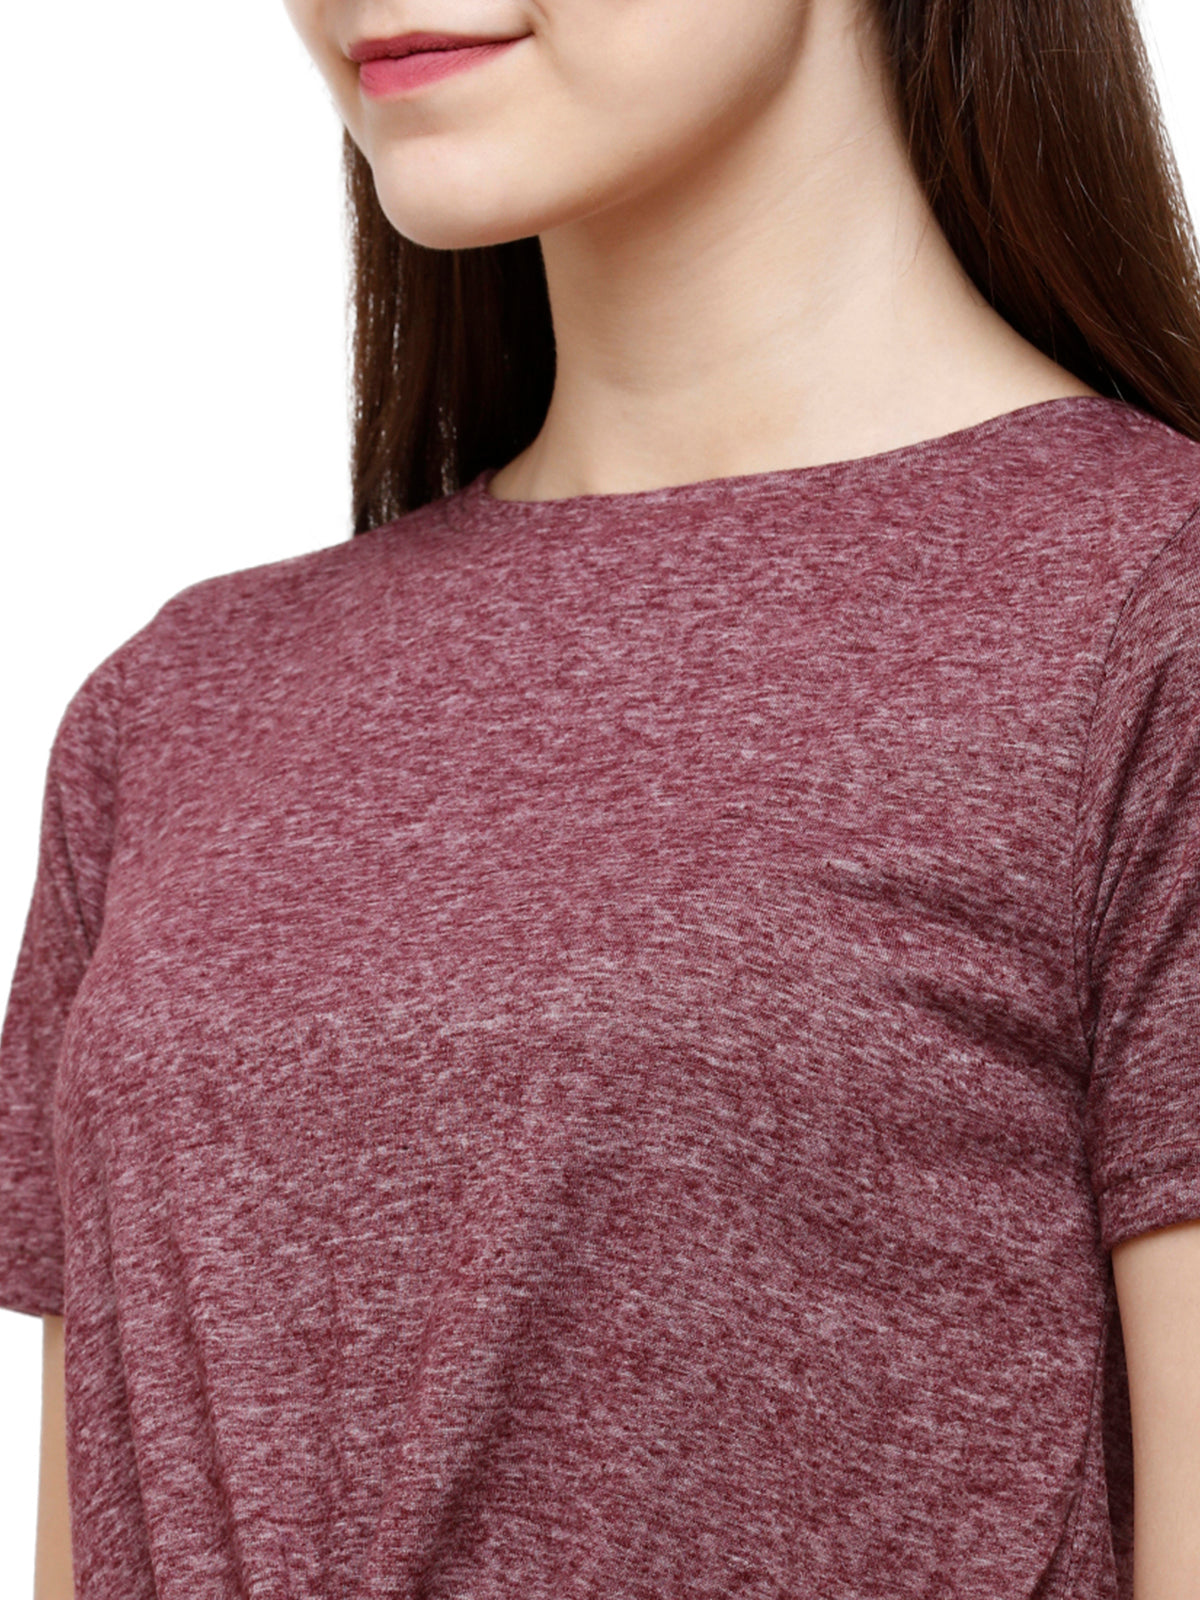 Identiti Women Round Neck Tee with a Front Knot